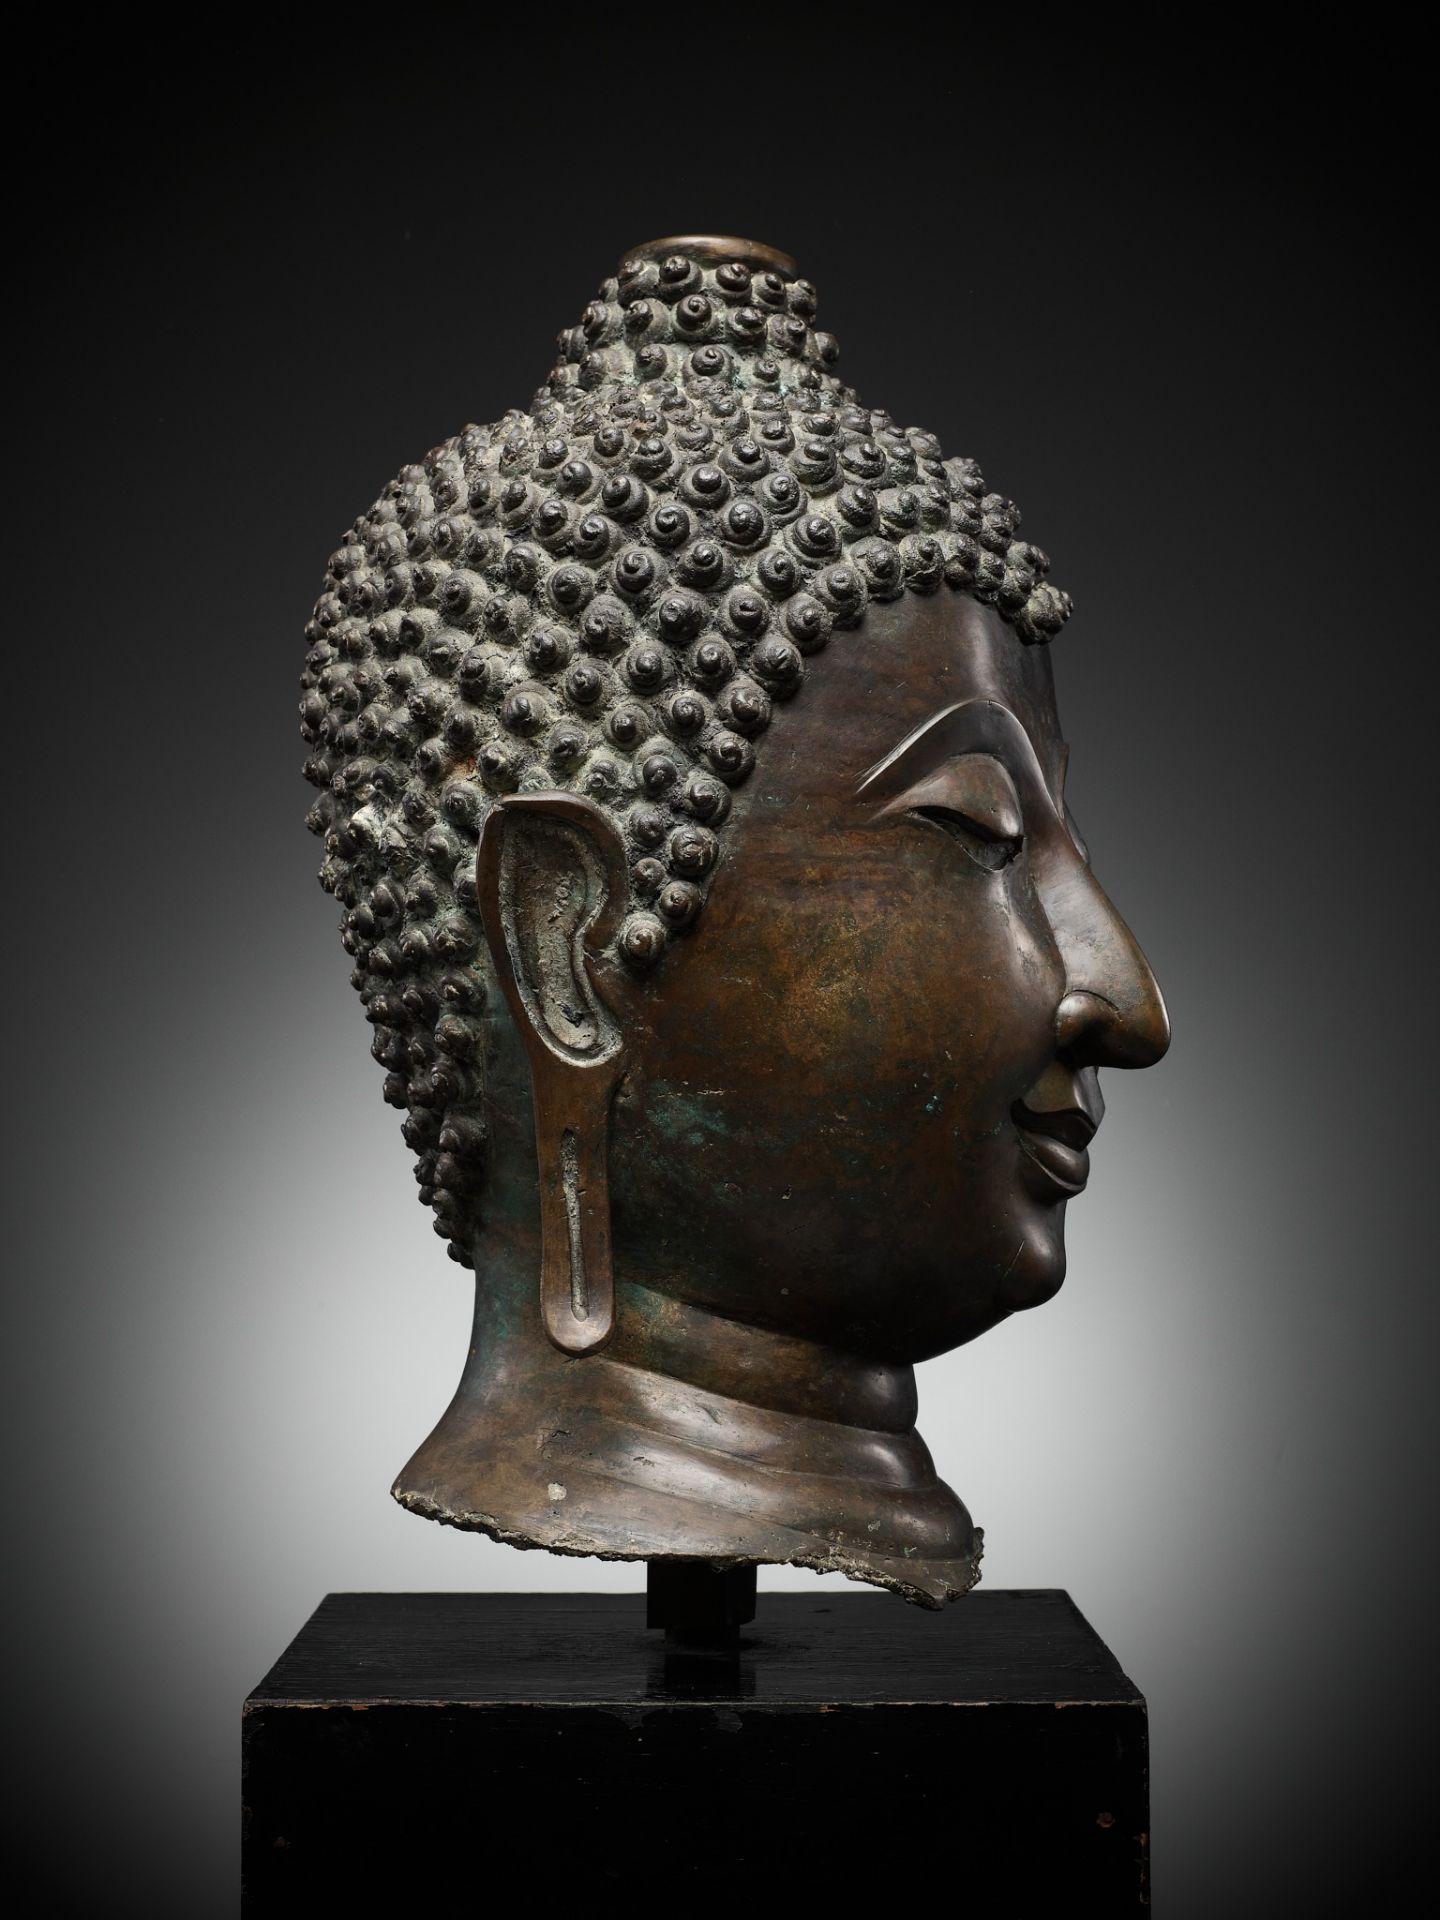 A MONUMENTAL BRONZE HEAD OF BUDDHA, LAN NA, NORTHERN THAILAND, 14TH-15th CENTURY - Image 12 of 16